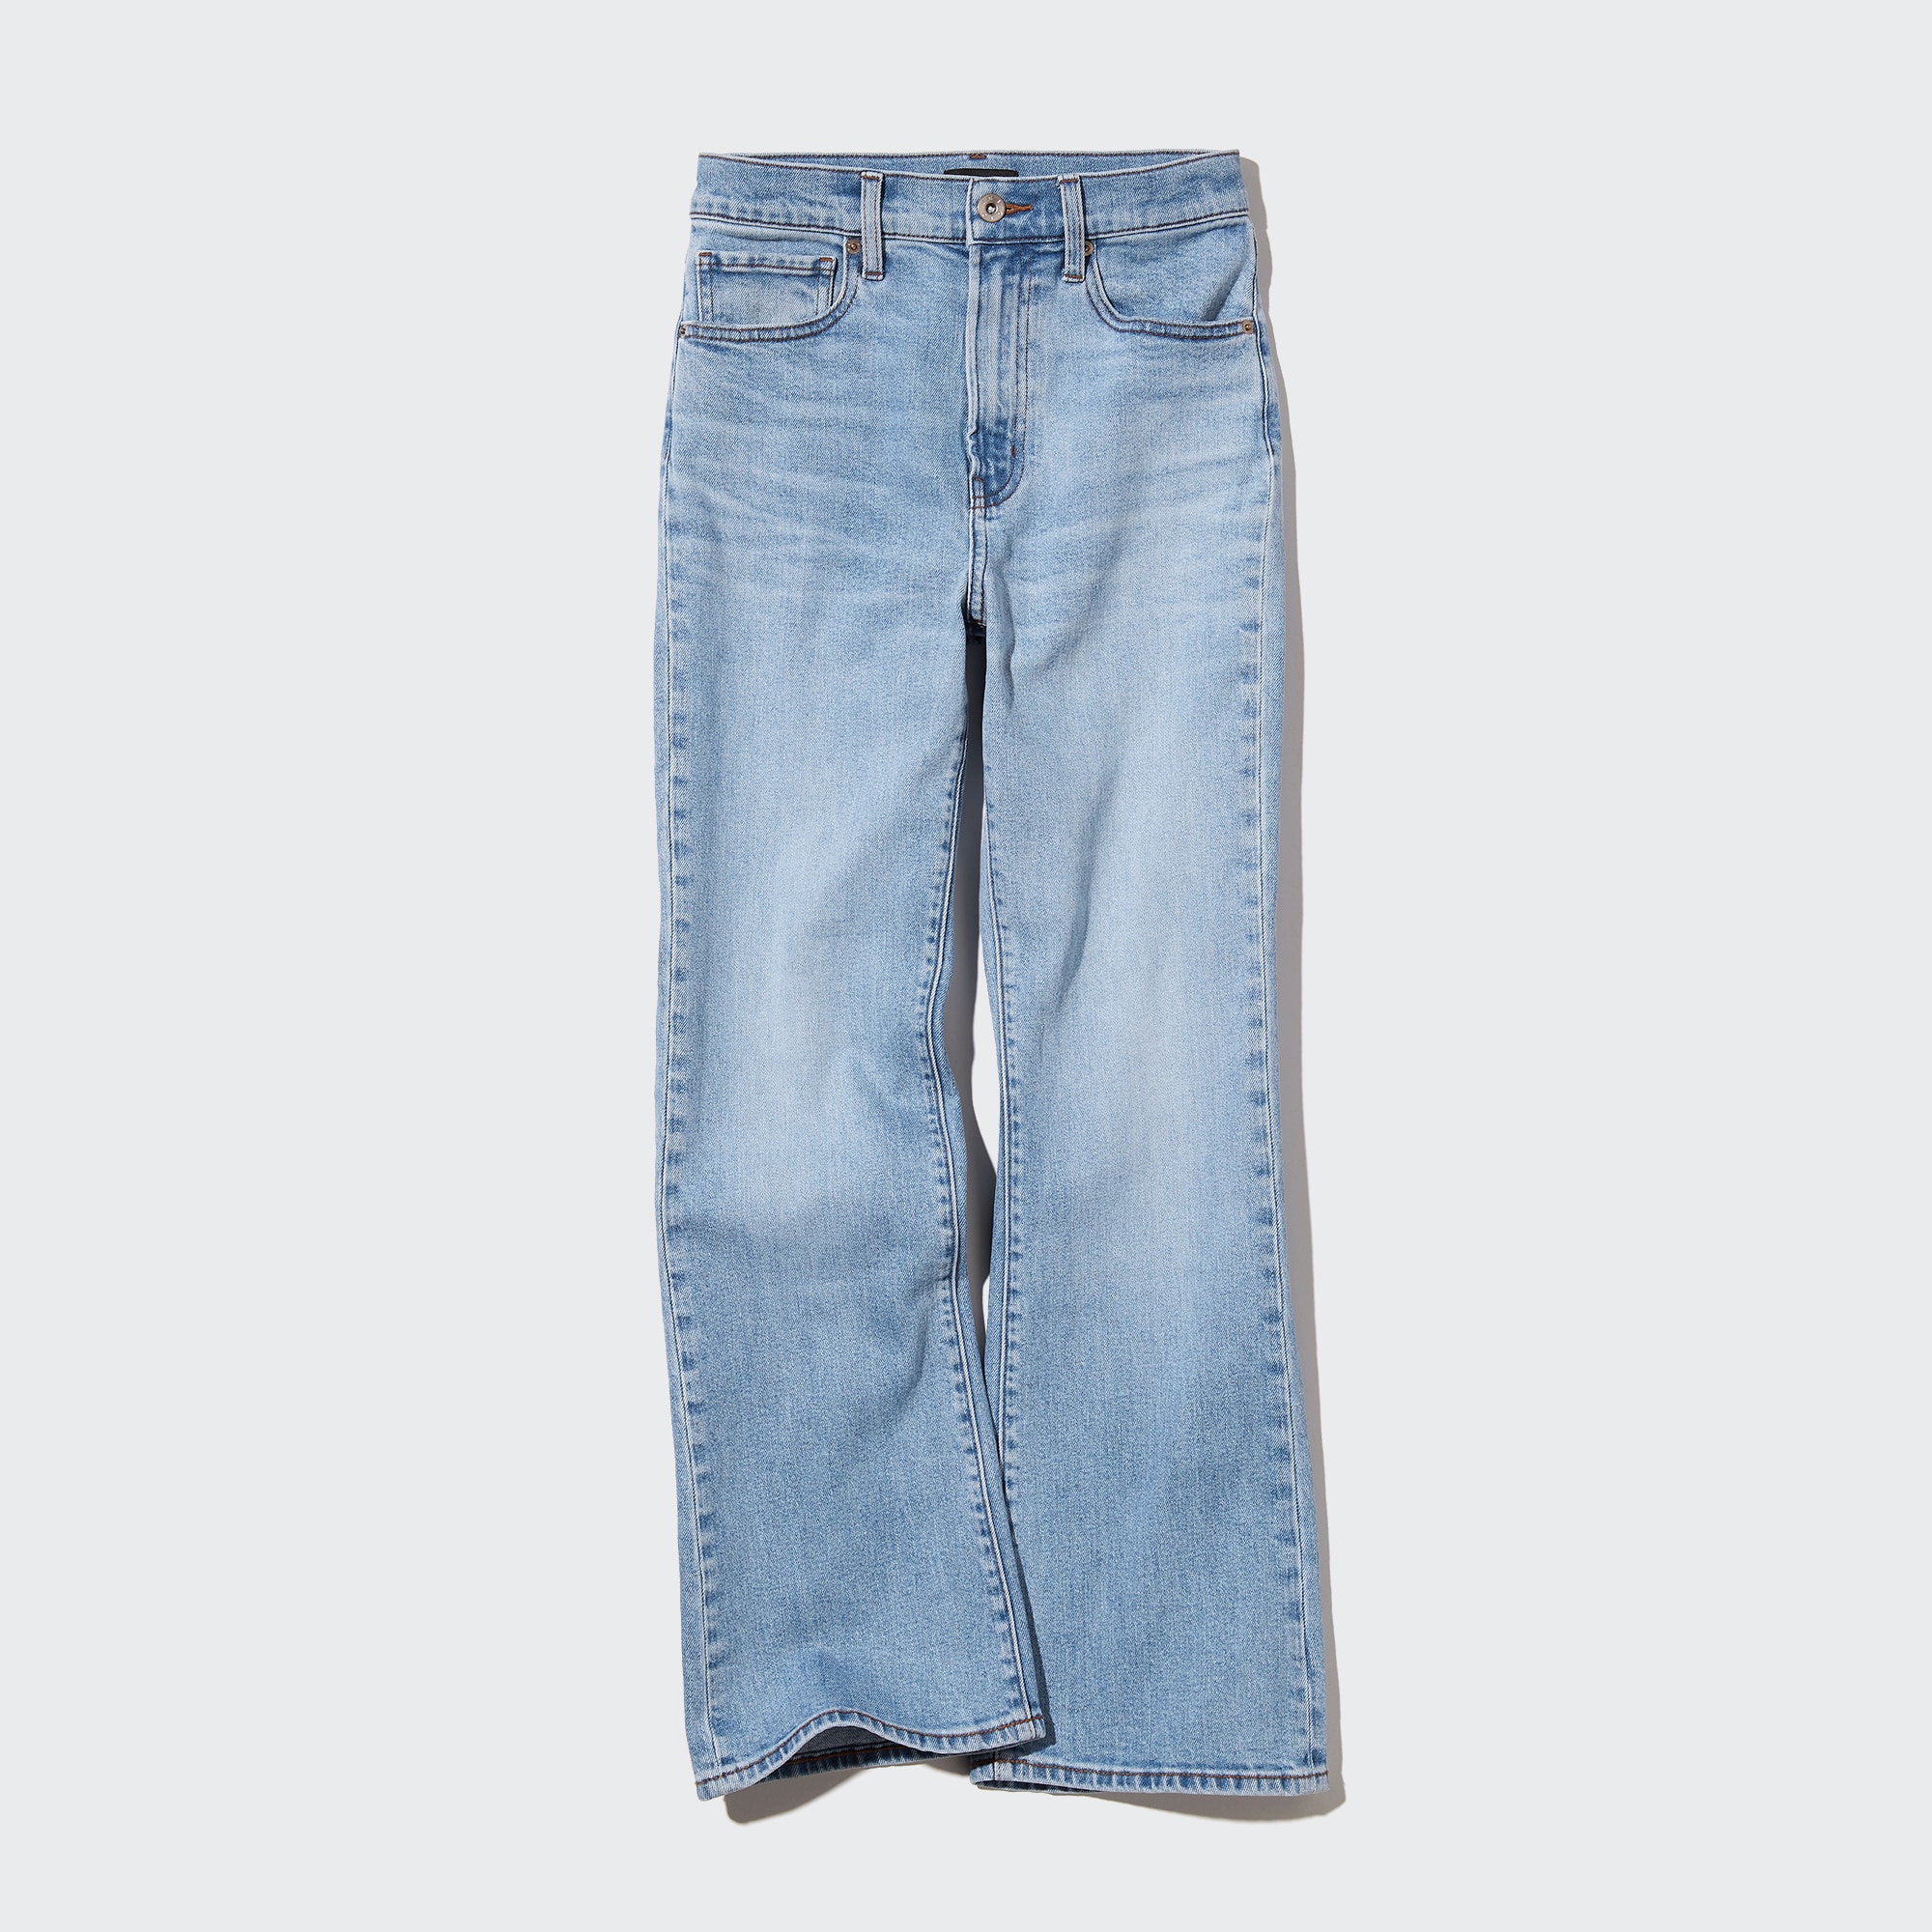 Uniqlo - Cotton High Rise Flared Jeans - Blue - 22inch